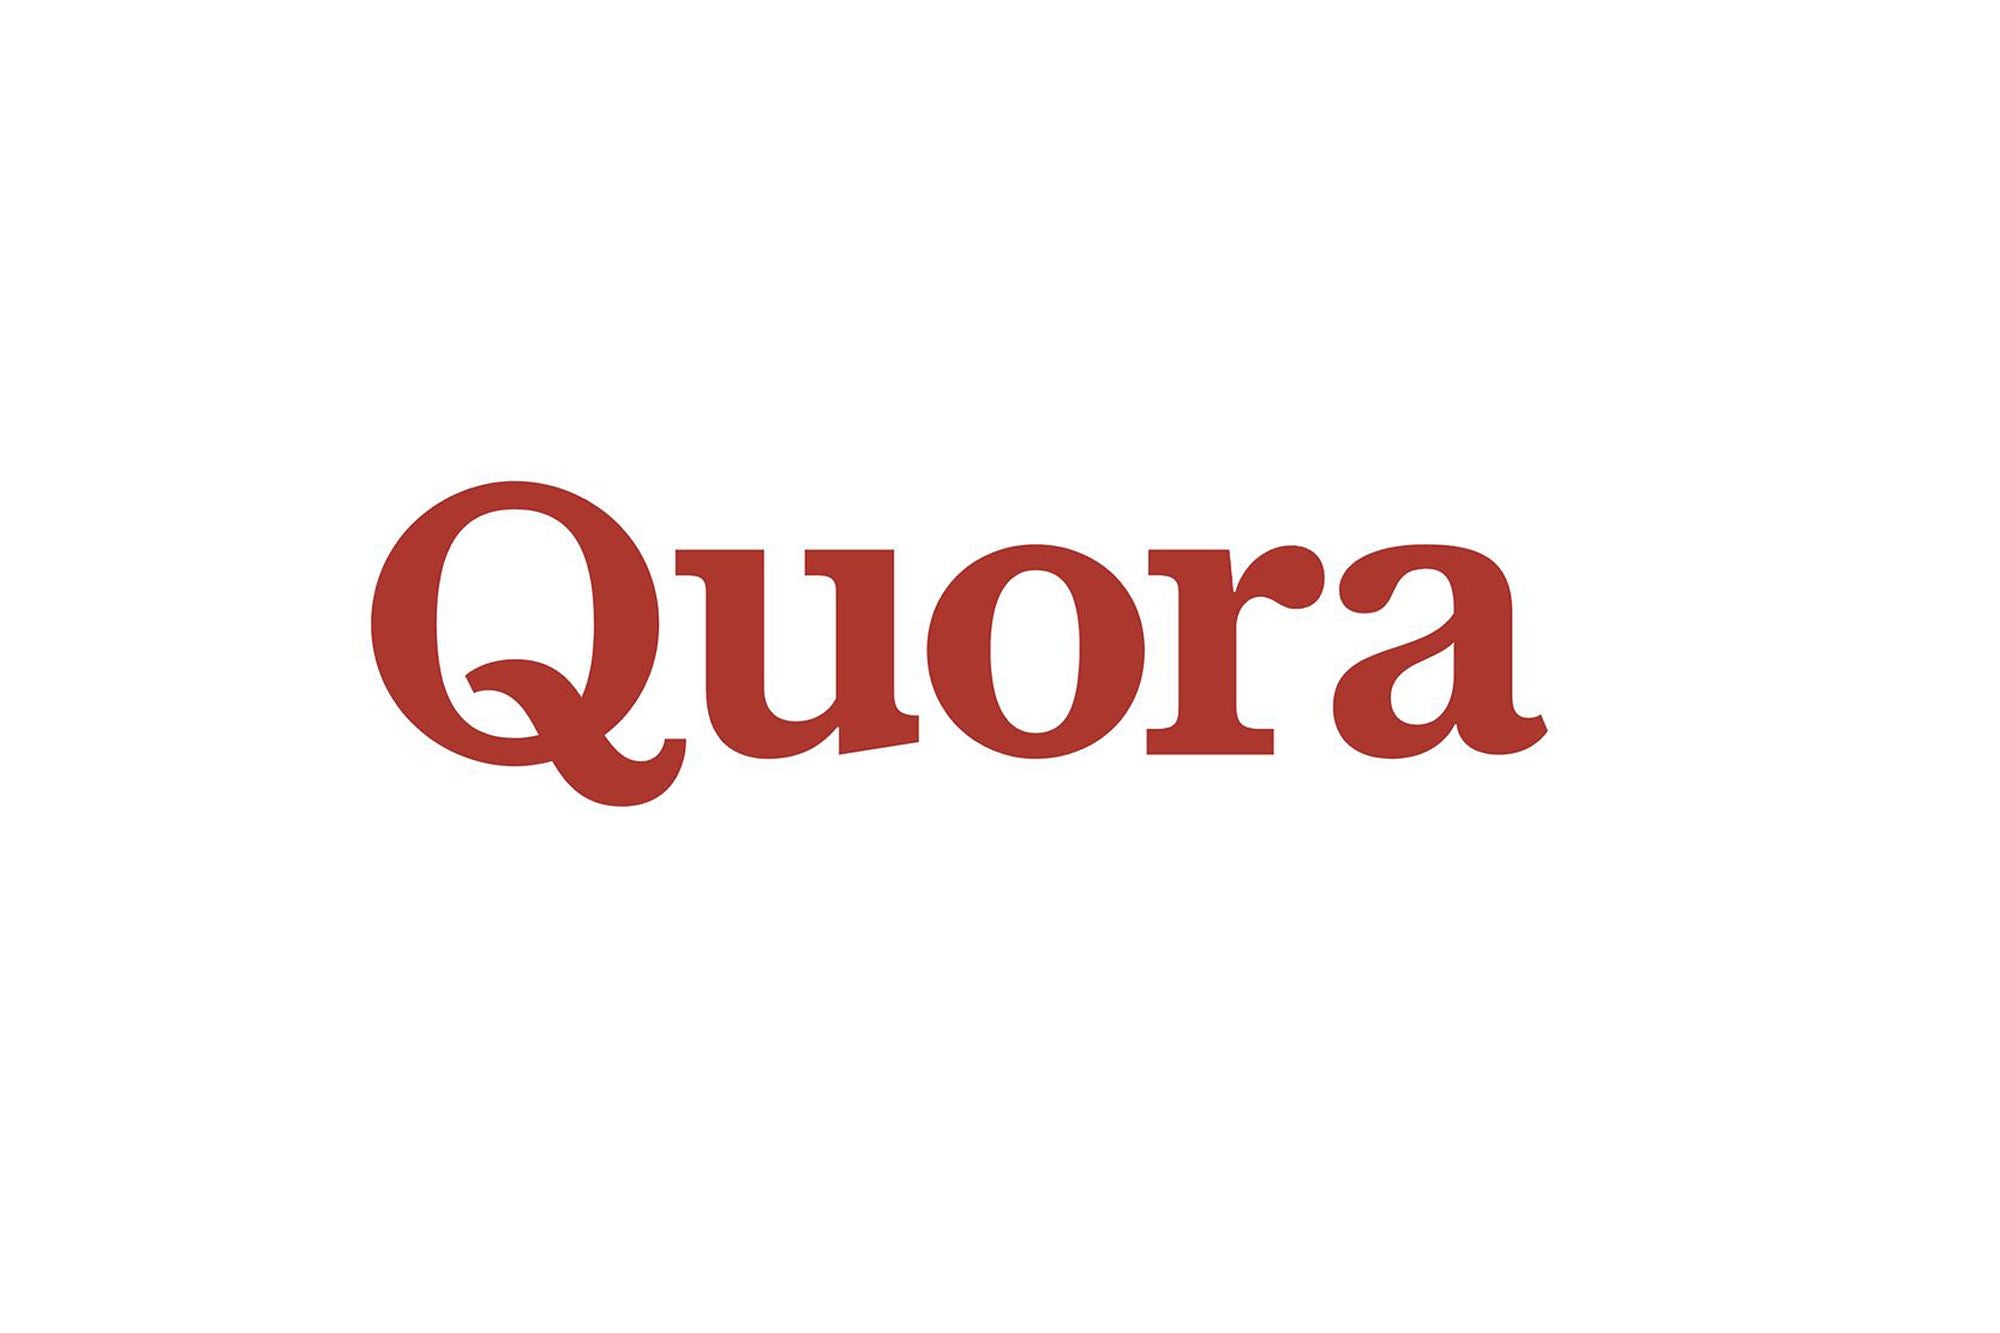 How To Make Money From Quora Spaces! - 1